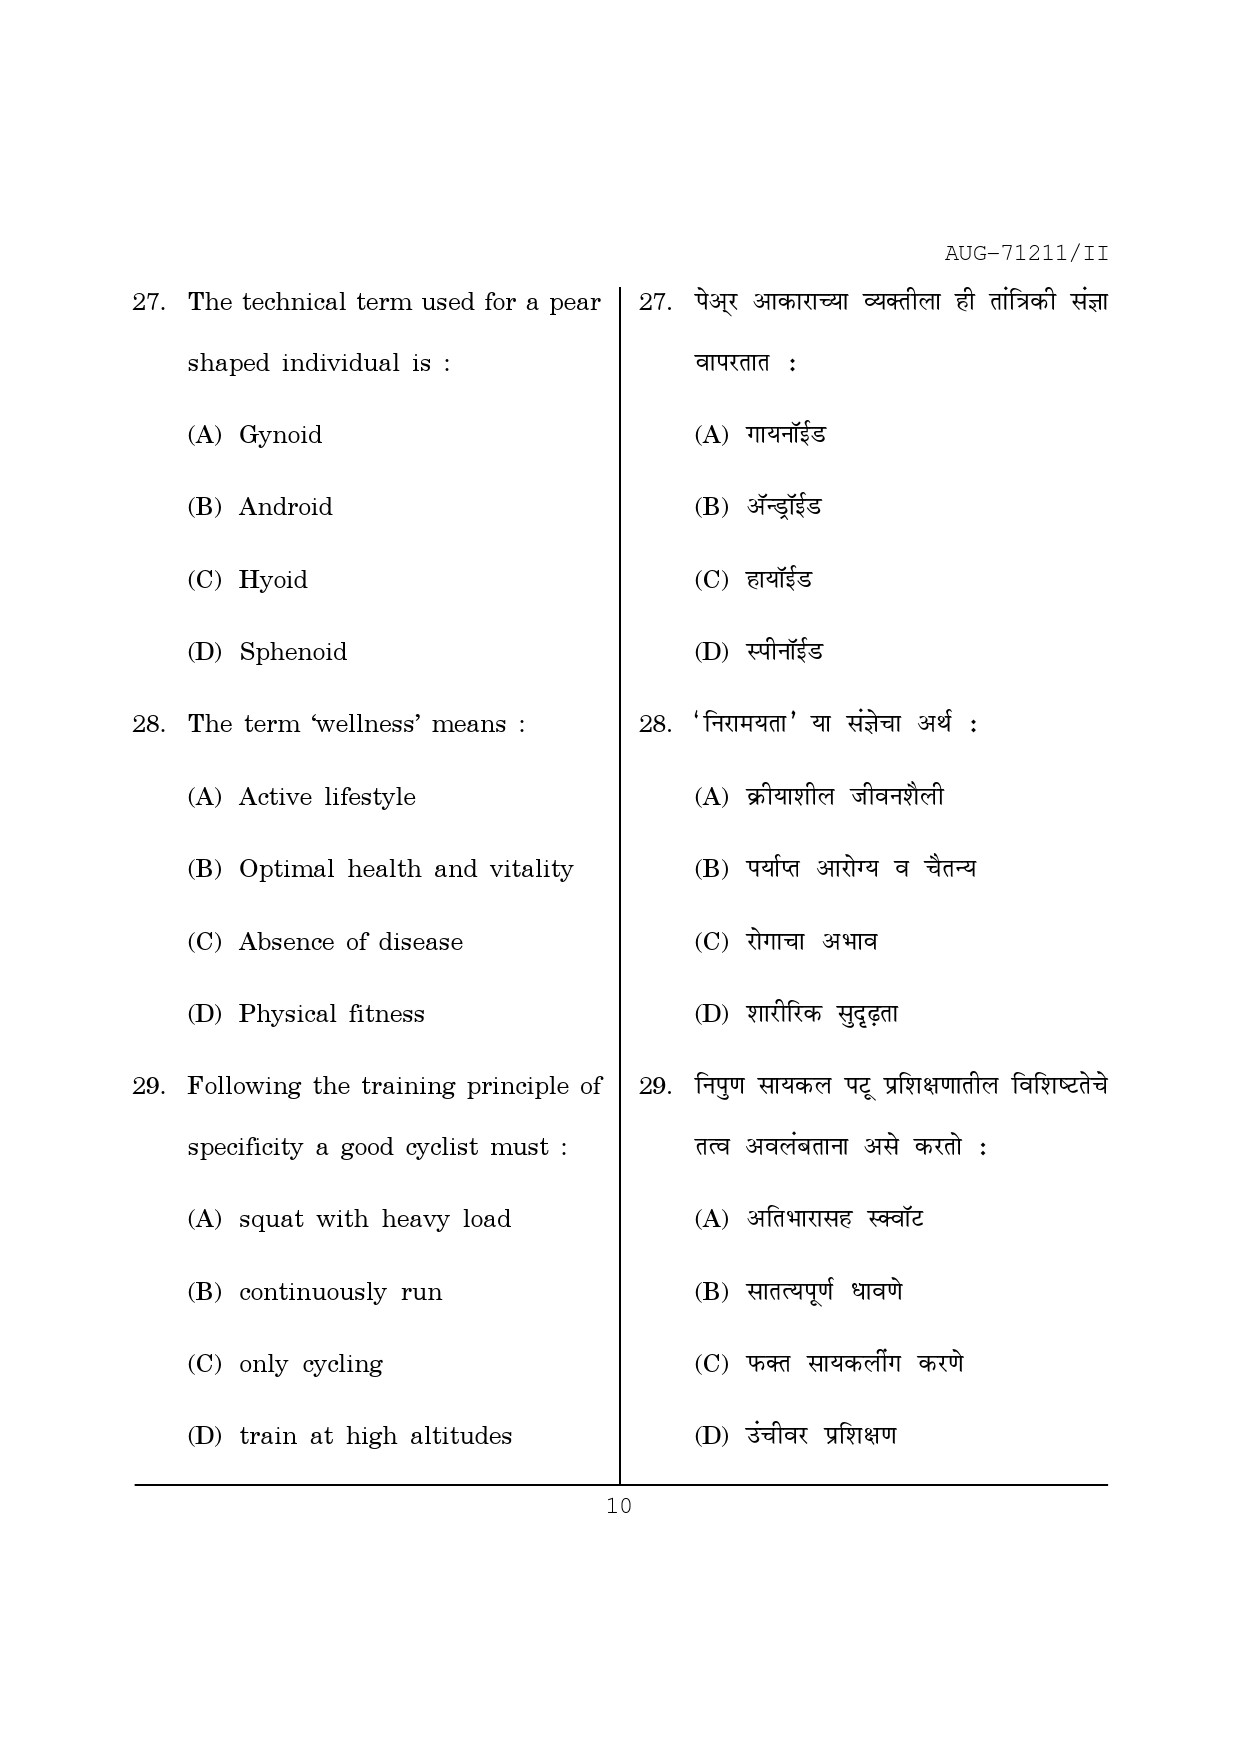 Maharashtra SET Physical Education Question Paper II August 2011 10